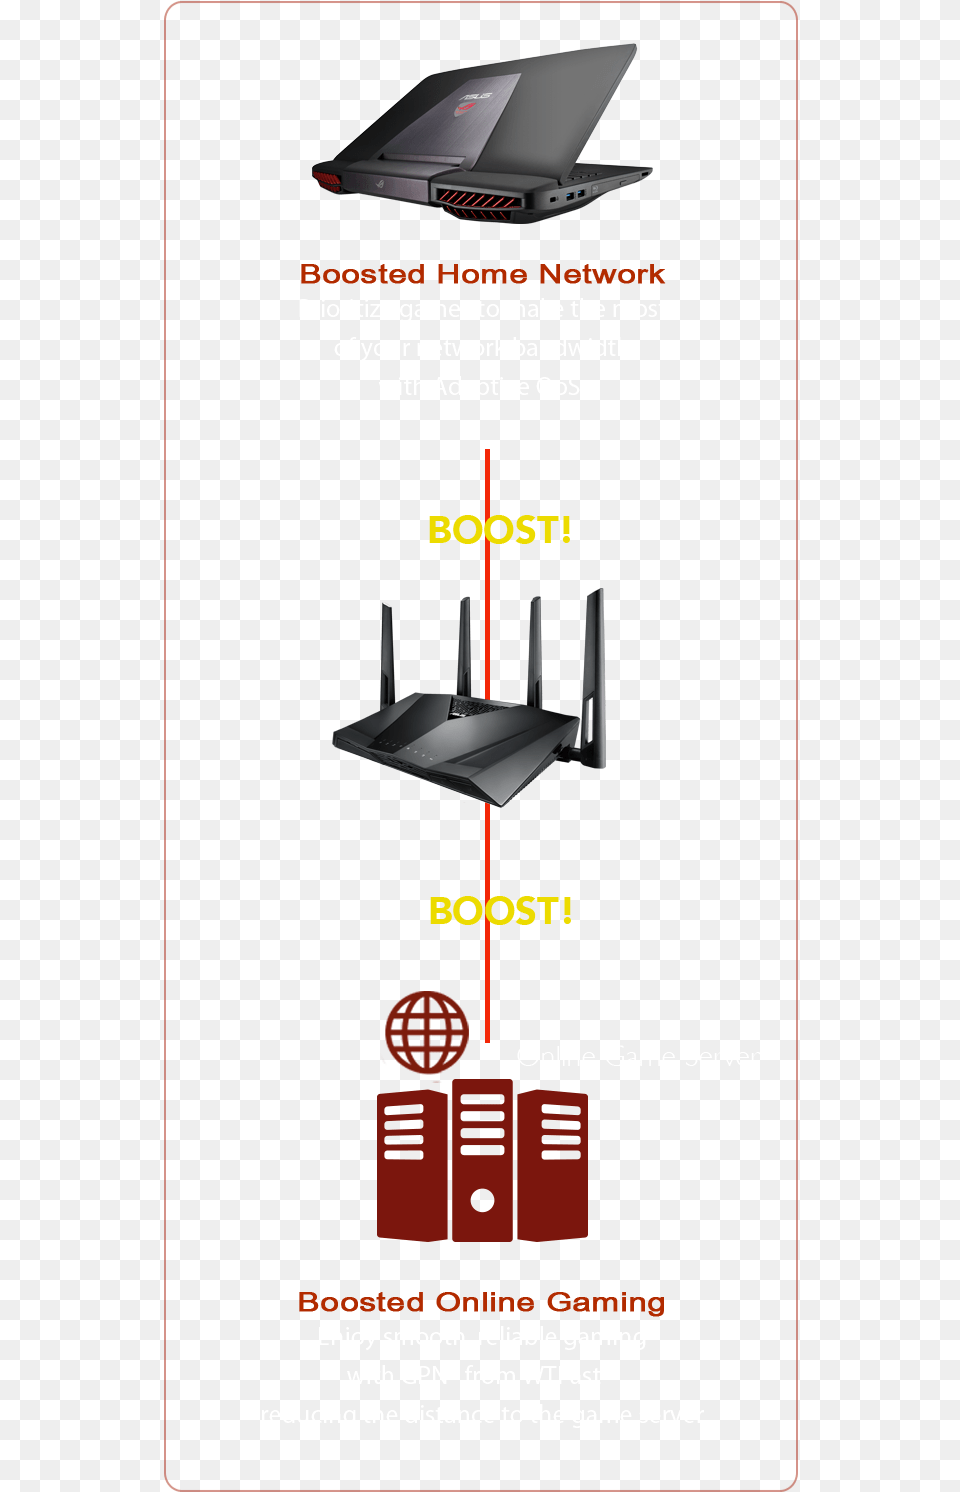 Rt Ac3100 Gaming Router Boosts Both Home Network And Computer Network, Electronics, Hardware, Advertisement, Poster Free Png